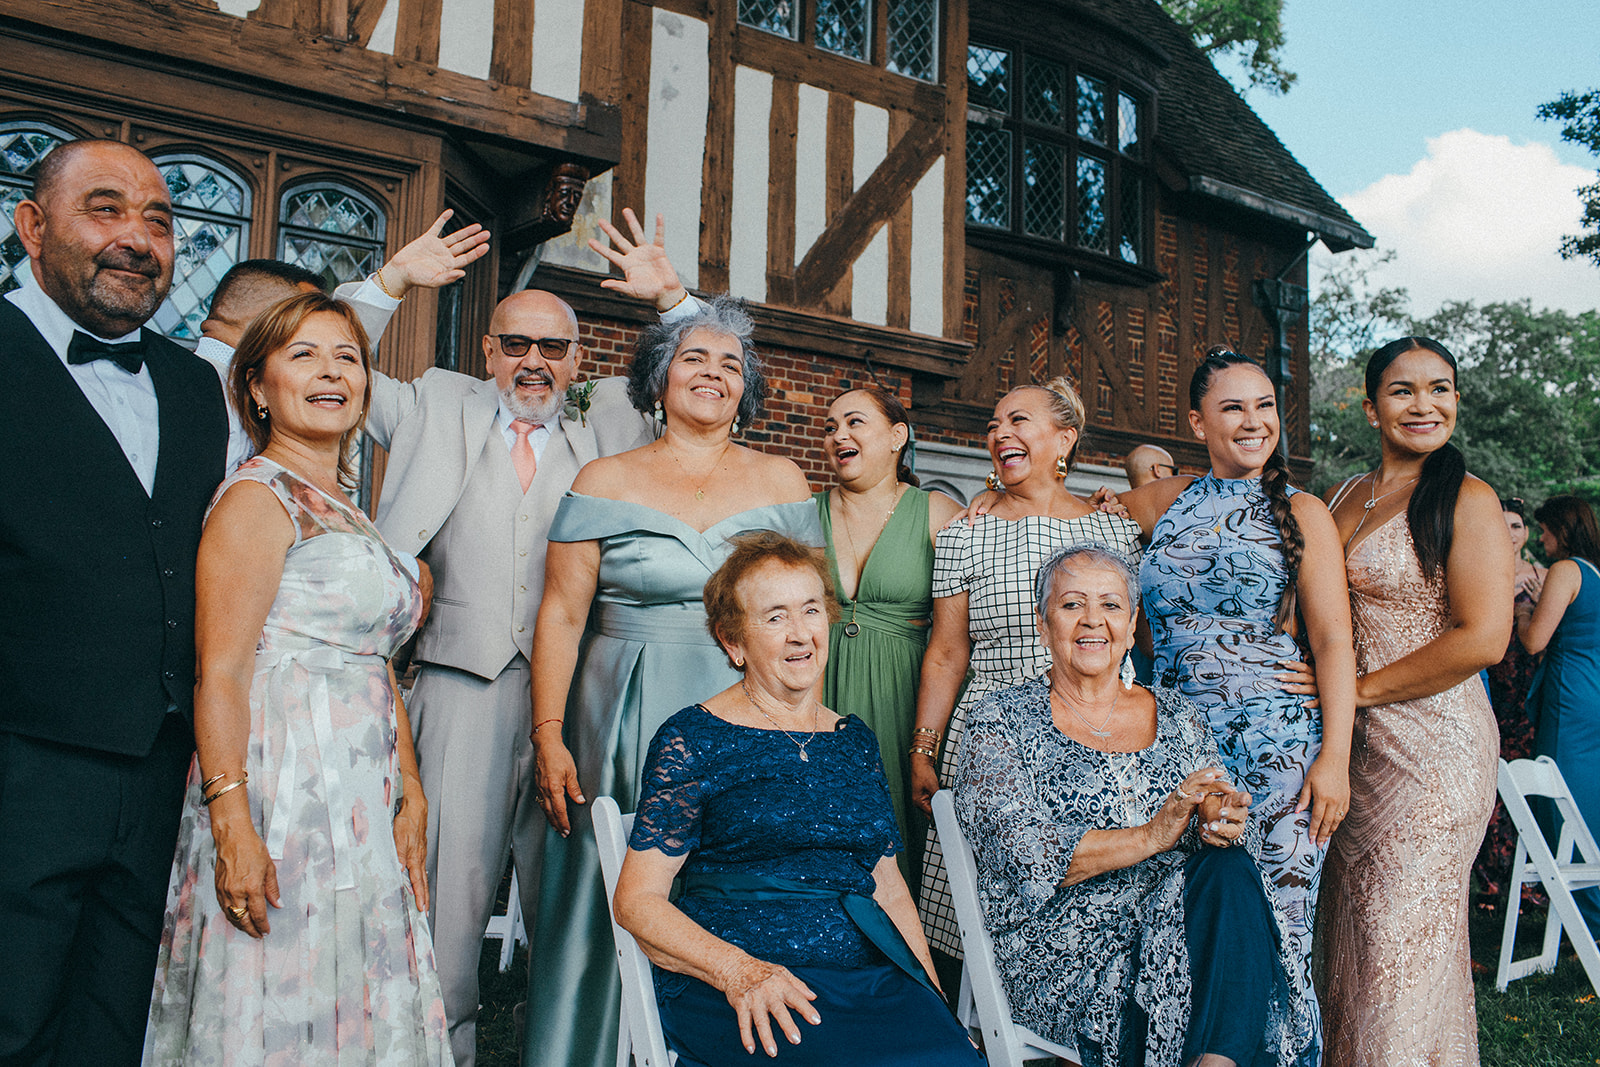 How to have fun, not stiff, wedding family portraits 